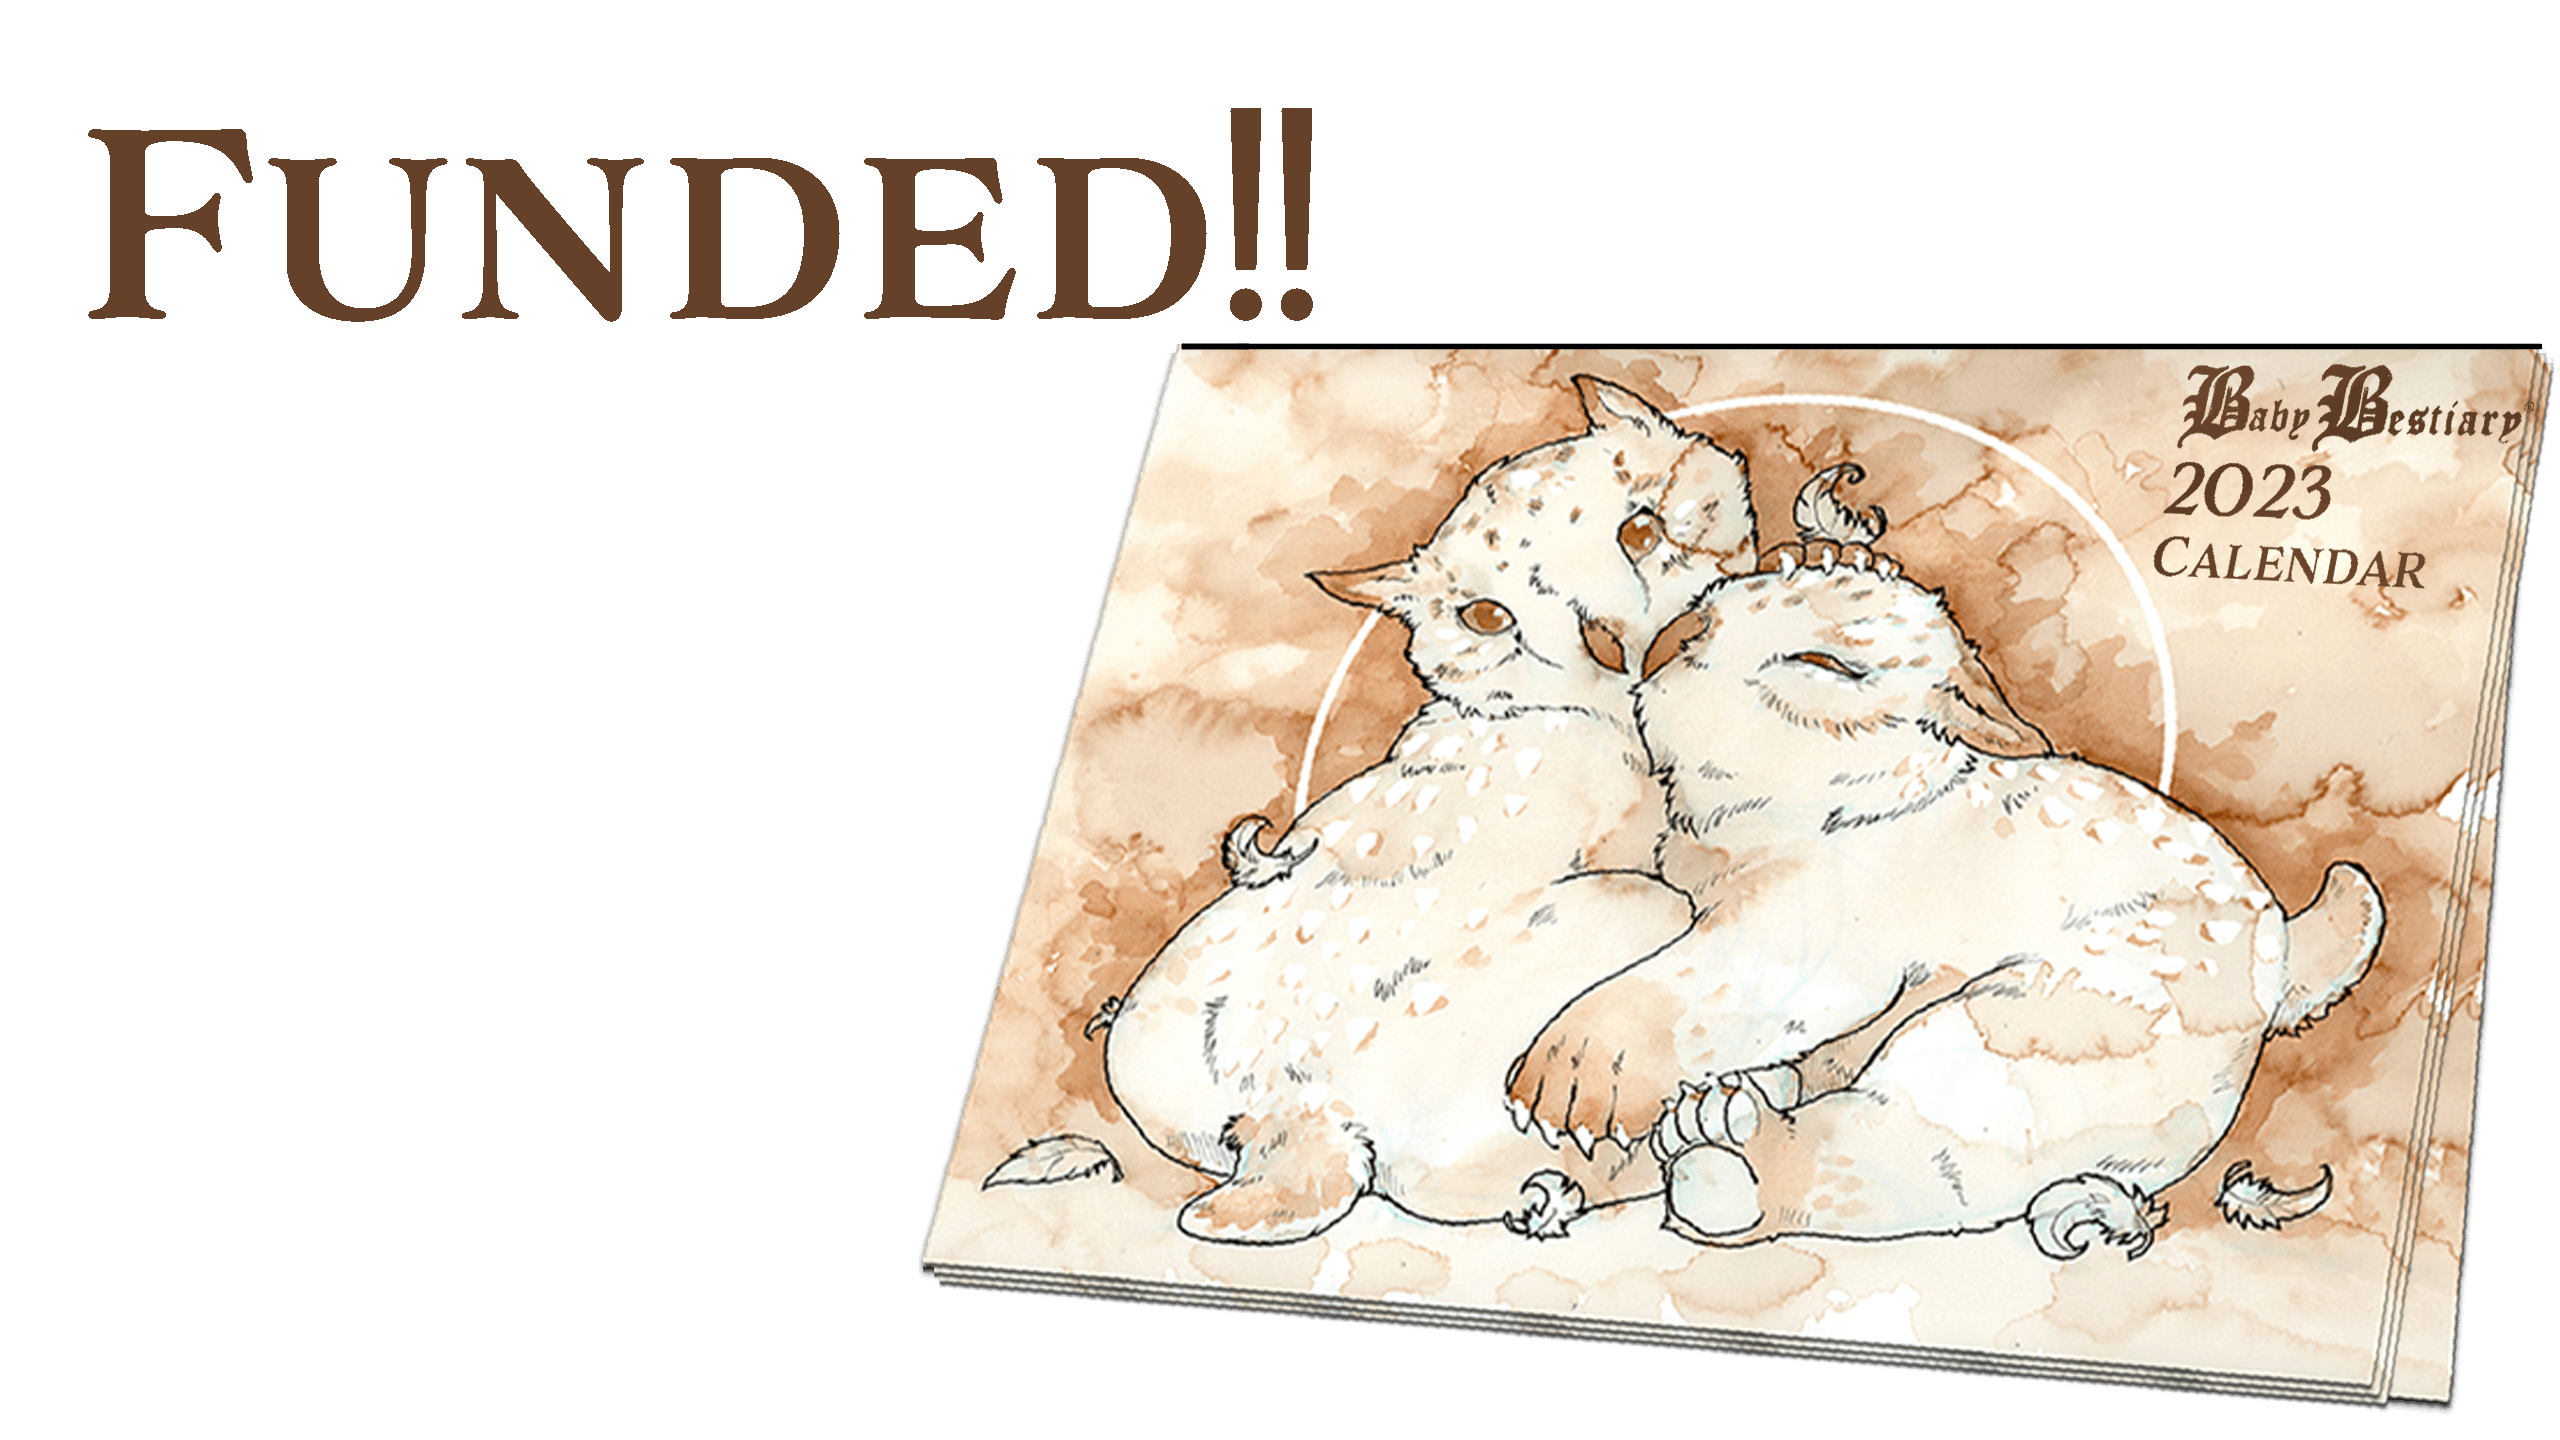 Funded!